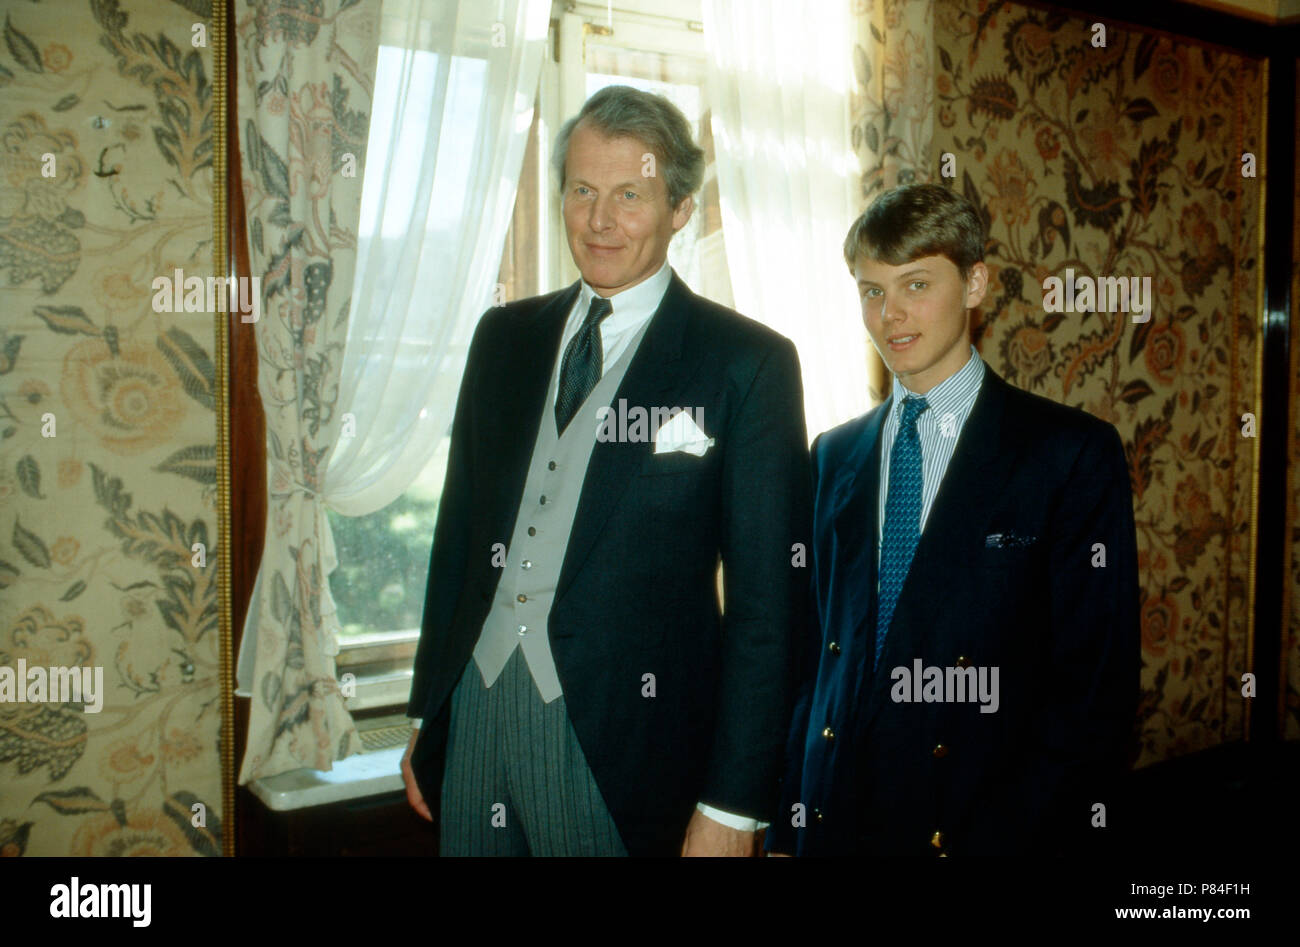 Anton Wolfgang Graf von Faber-Castell mit Sohn Charles, Deutschland 1996. Anton  Wolfgang Count of Faber Castell with his son Charles, Germany 1996 Stock  Photo - Alamy